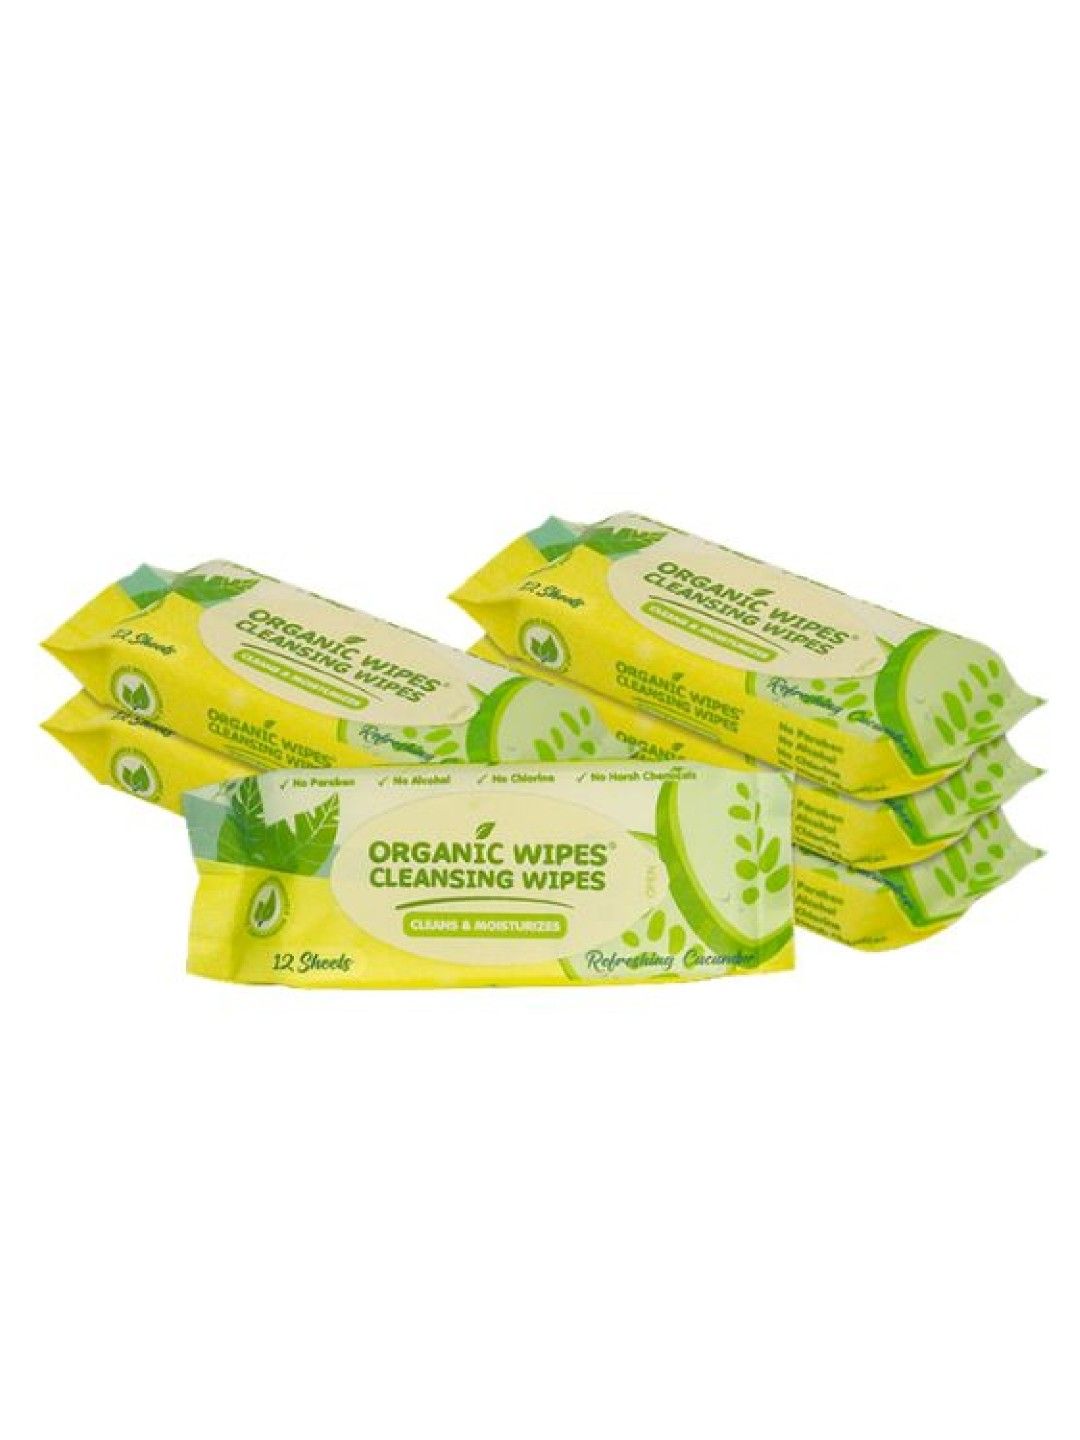 Organic Baby Wipes Organic Wipes Cleansing Wipes Refreshing Cucumber (12s x 6-pack)